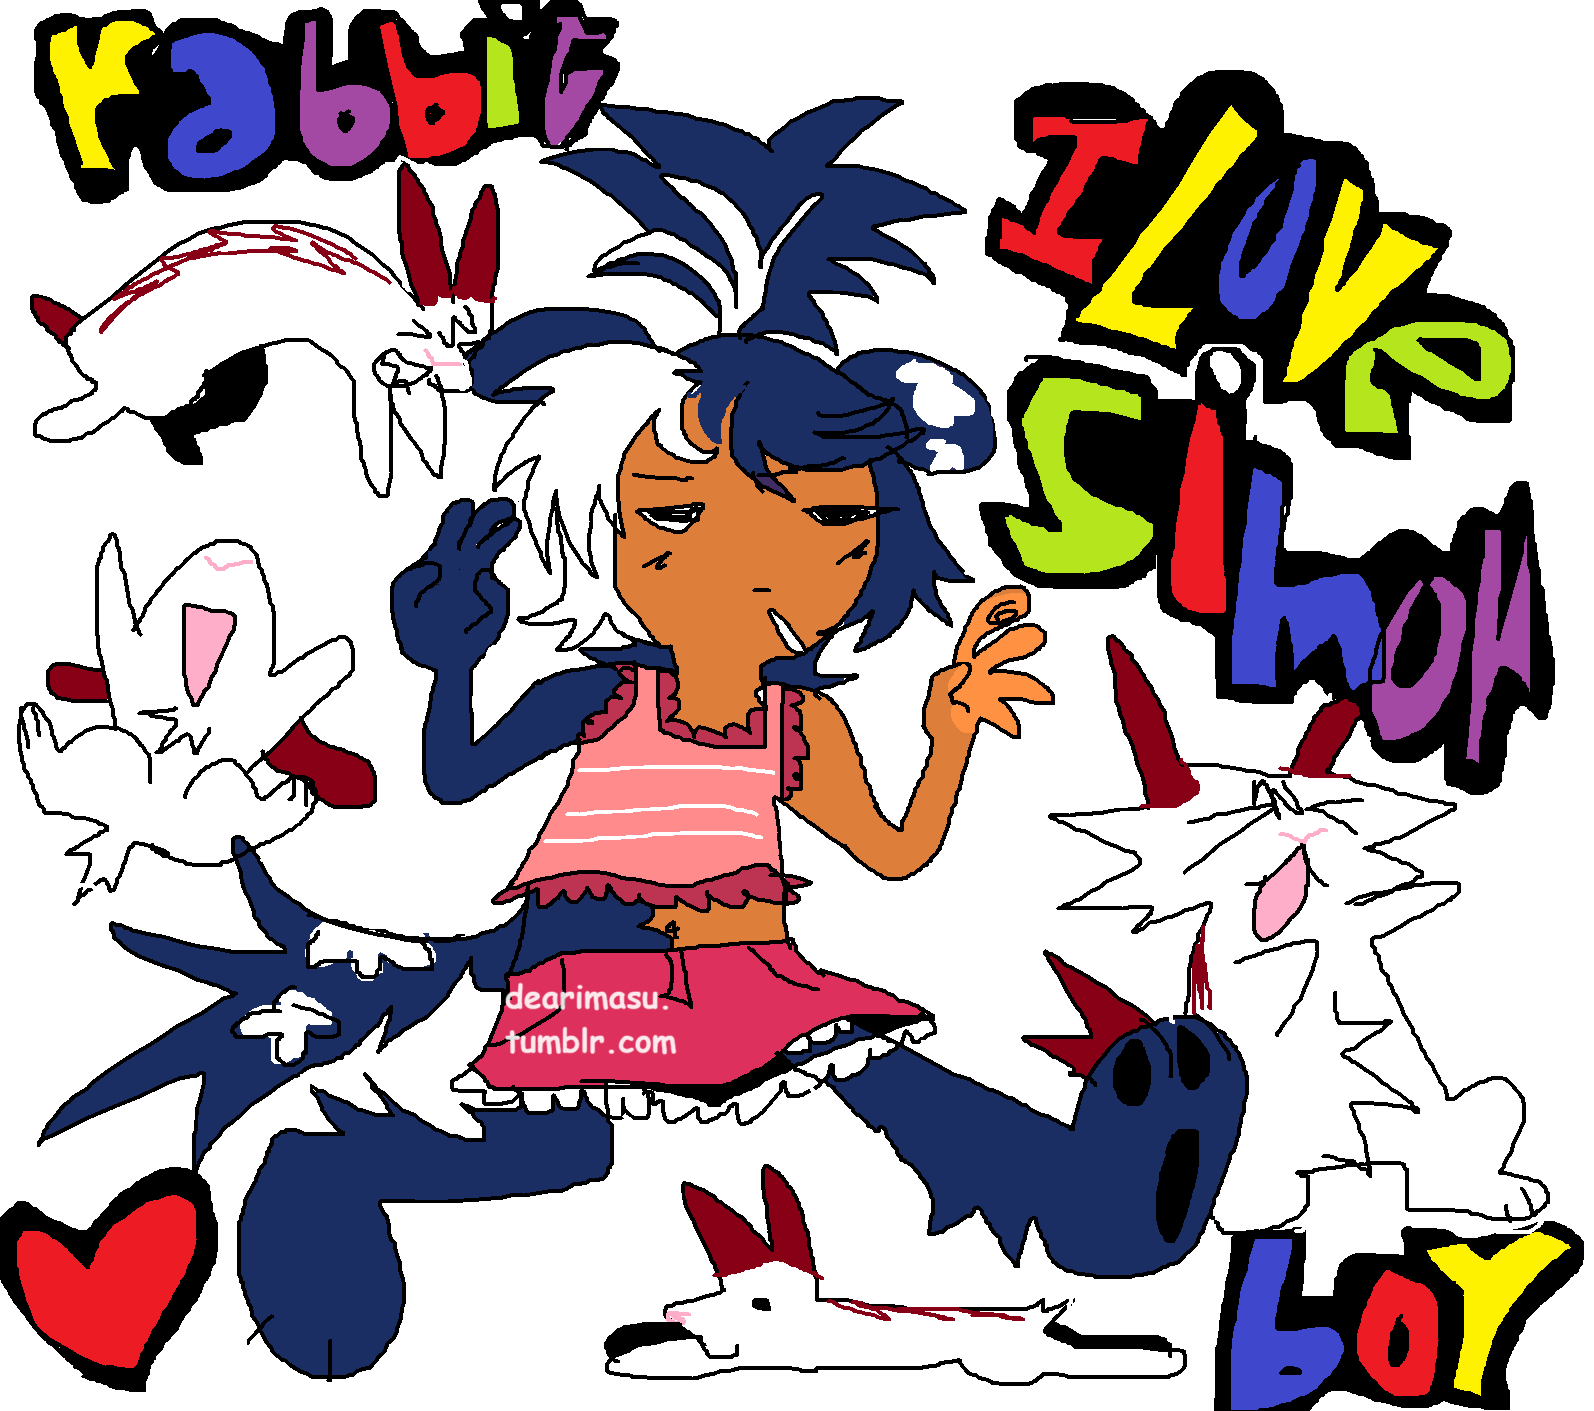 A crude, childlike drawing of the webmaster's sona, surrounded by drawings of simon. There's floating text that reads: Rabbit boy / i love simon.